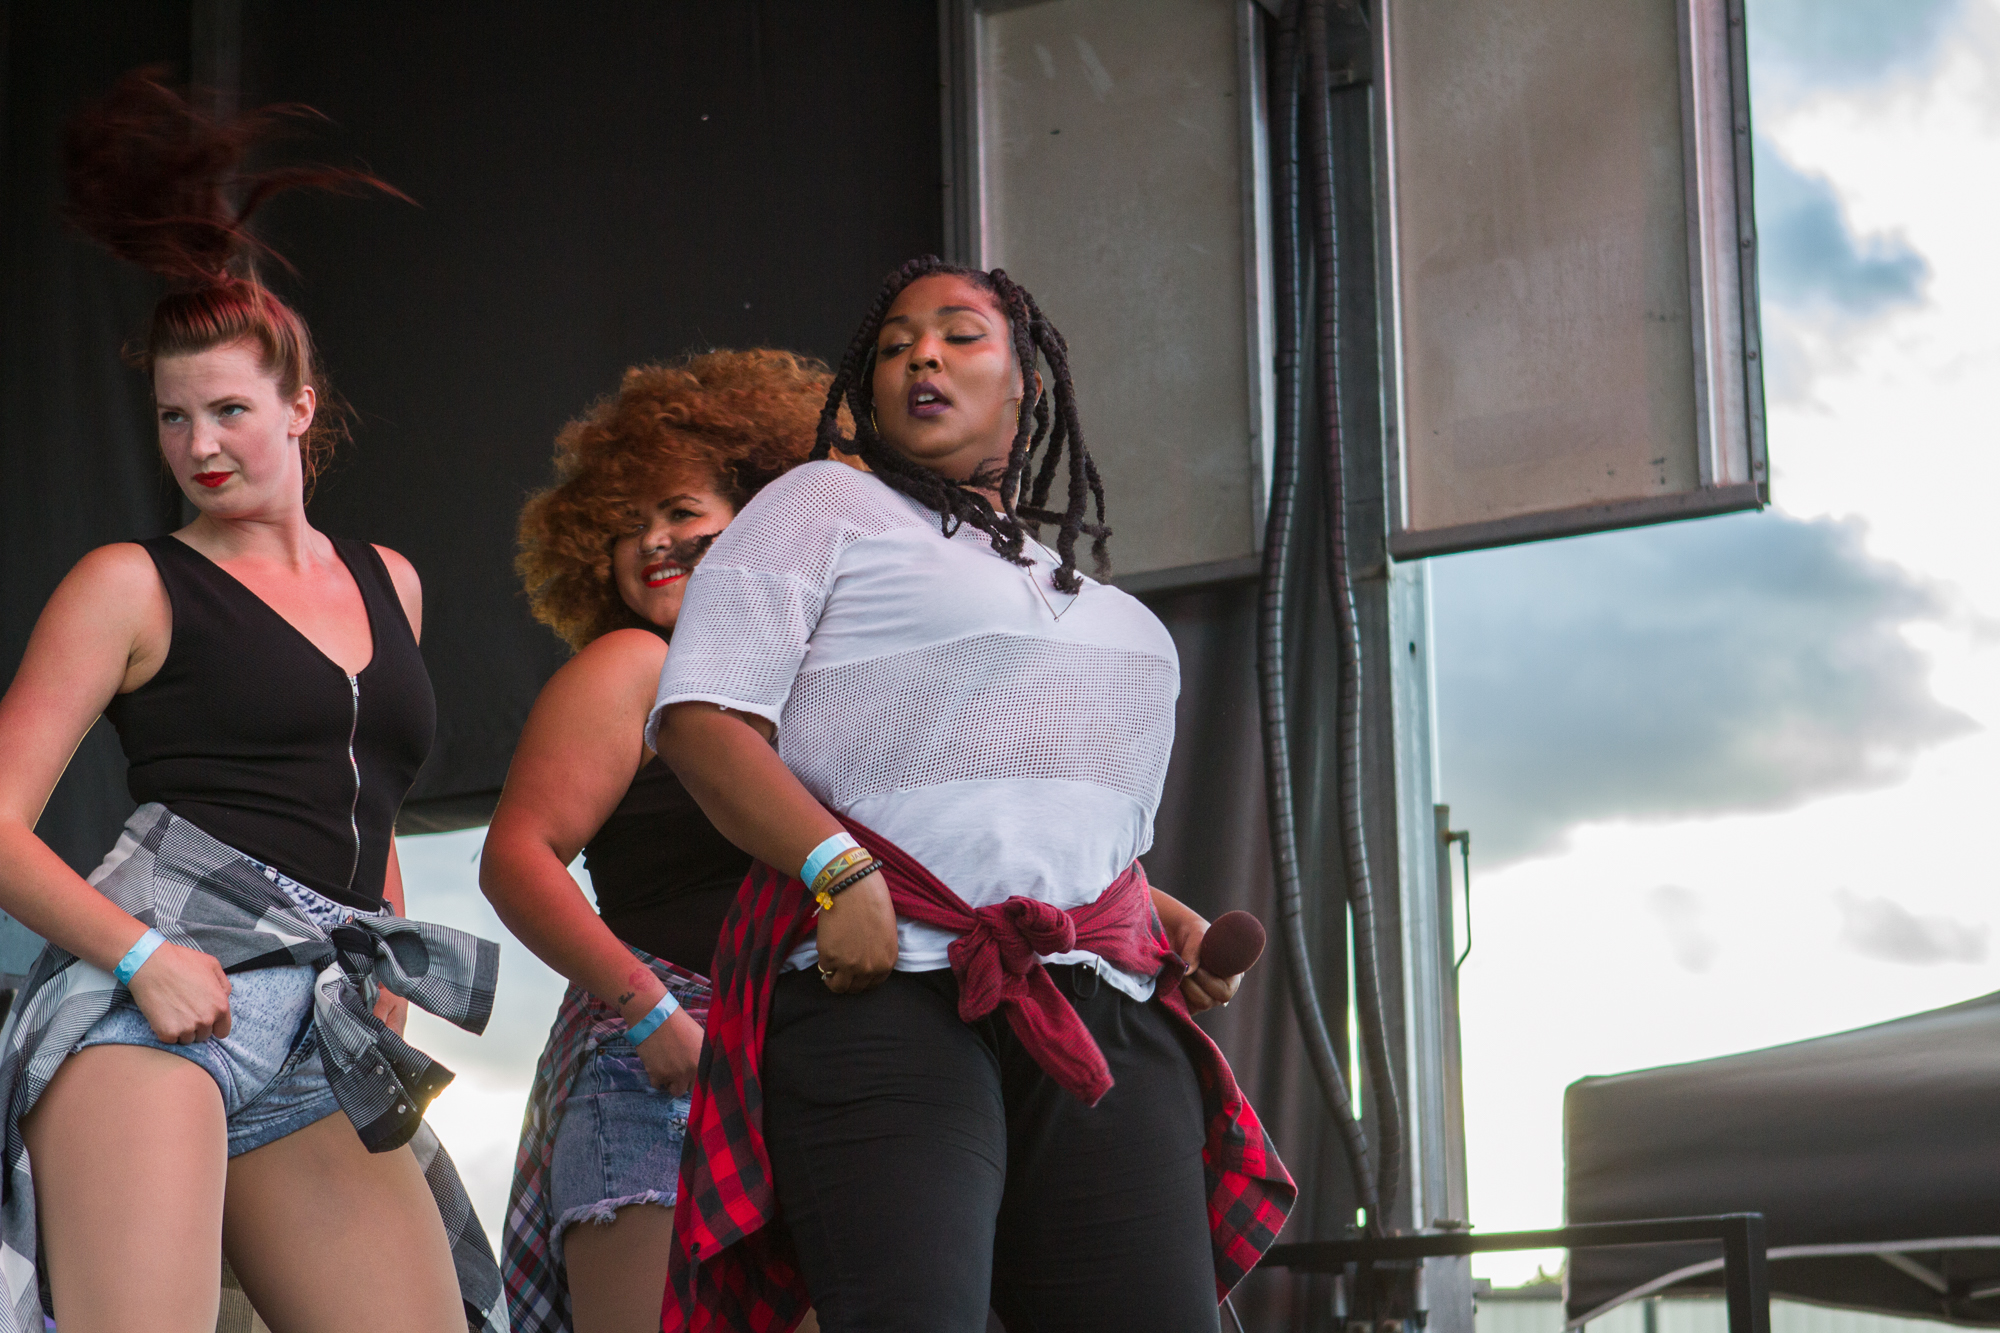 Lizzo performing in Madison, Wisconsin